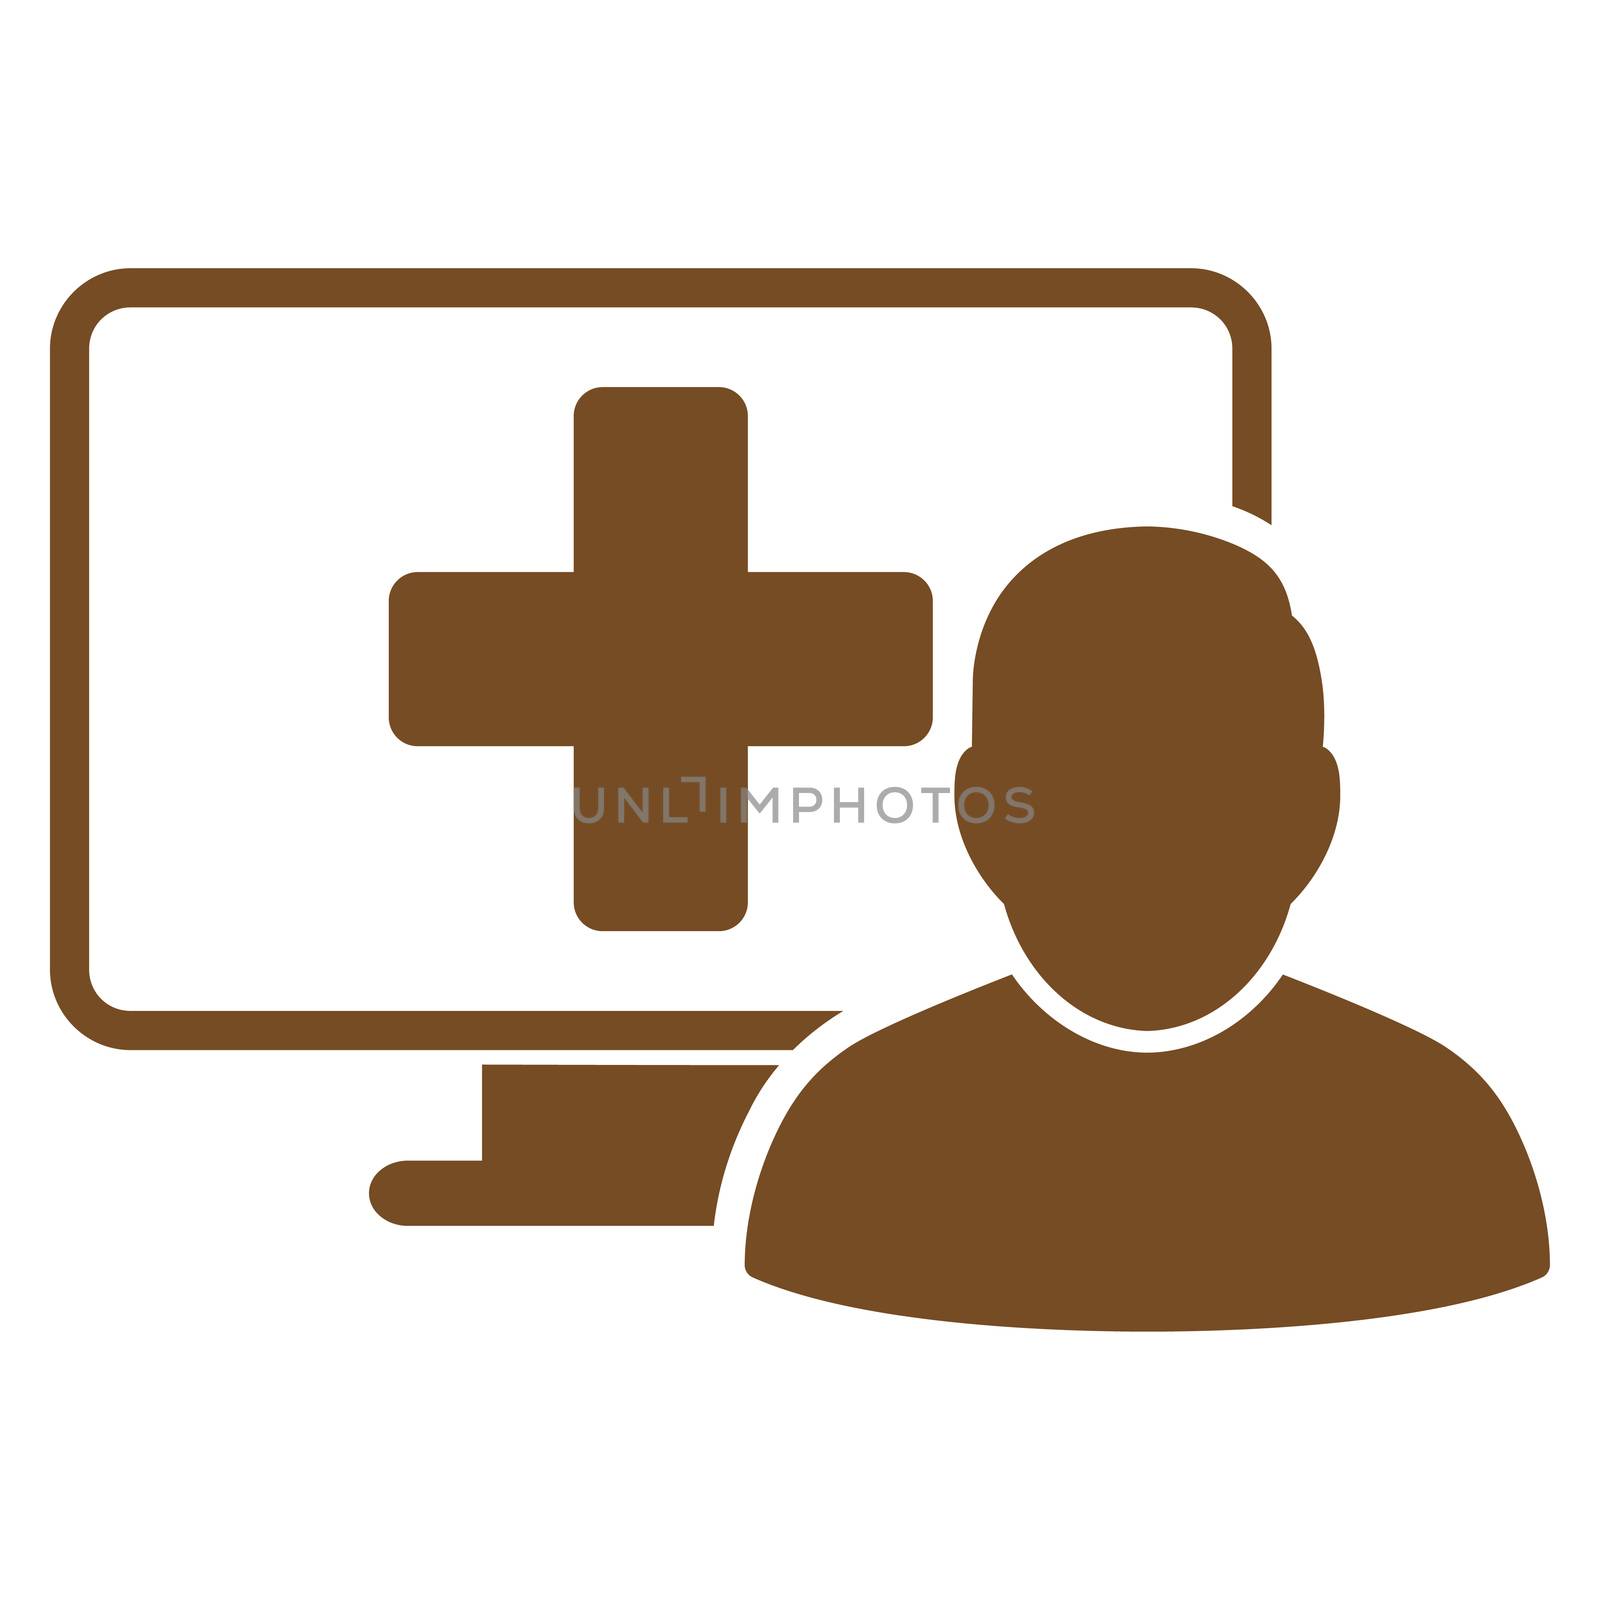 Online Medicine raster icon. Style is flat symbol, brown color, rounded angles, white background.